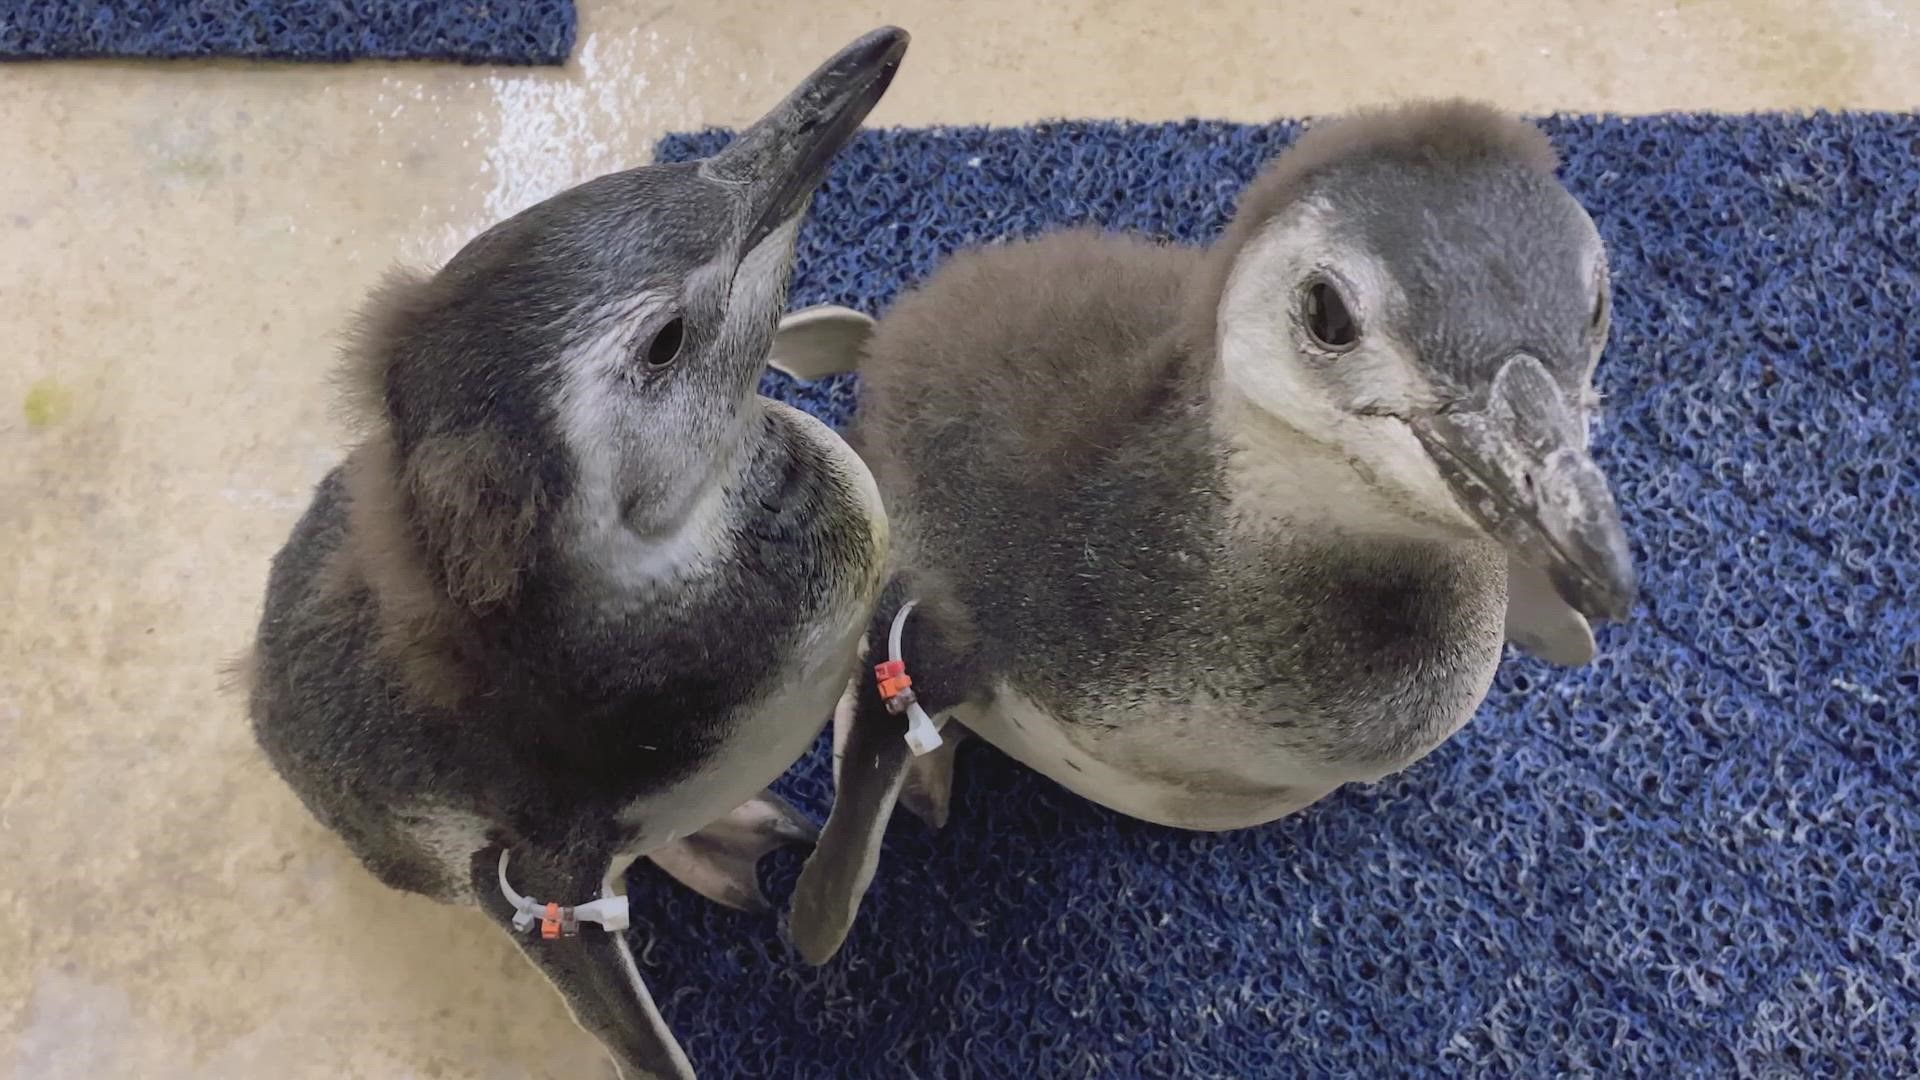 Shedd Aquarium shared two videos of its four penguin chicks taking their first swim.